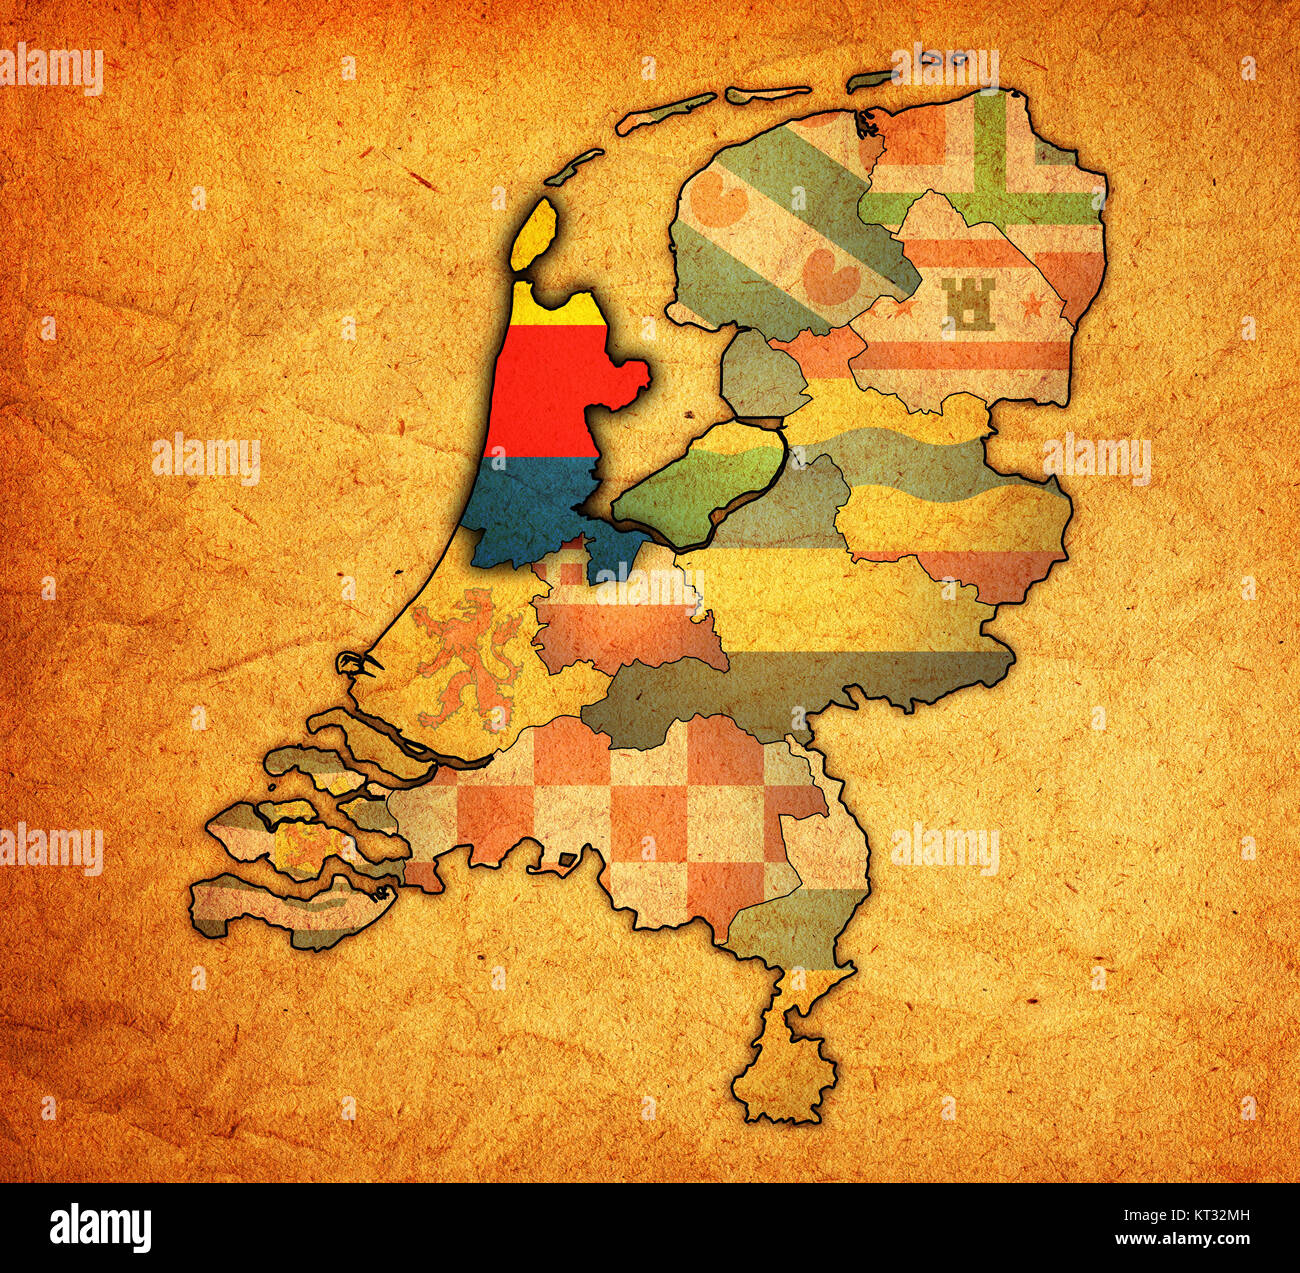 north holland on map of provinces of netherlands Stock Photo